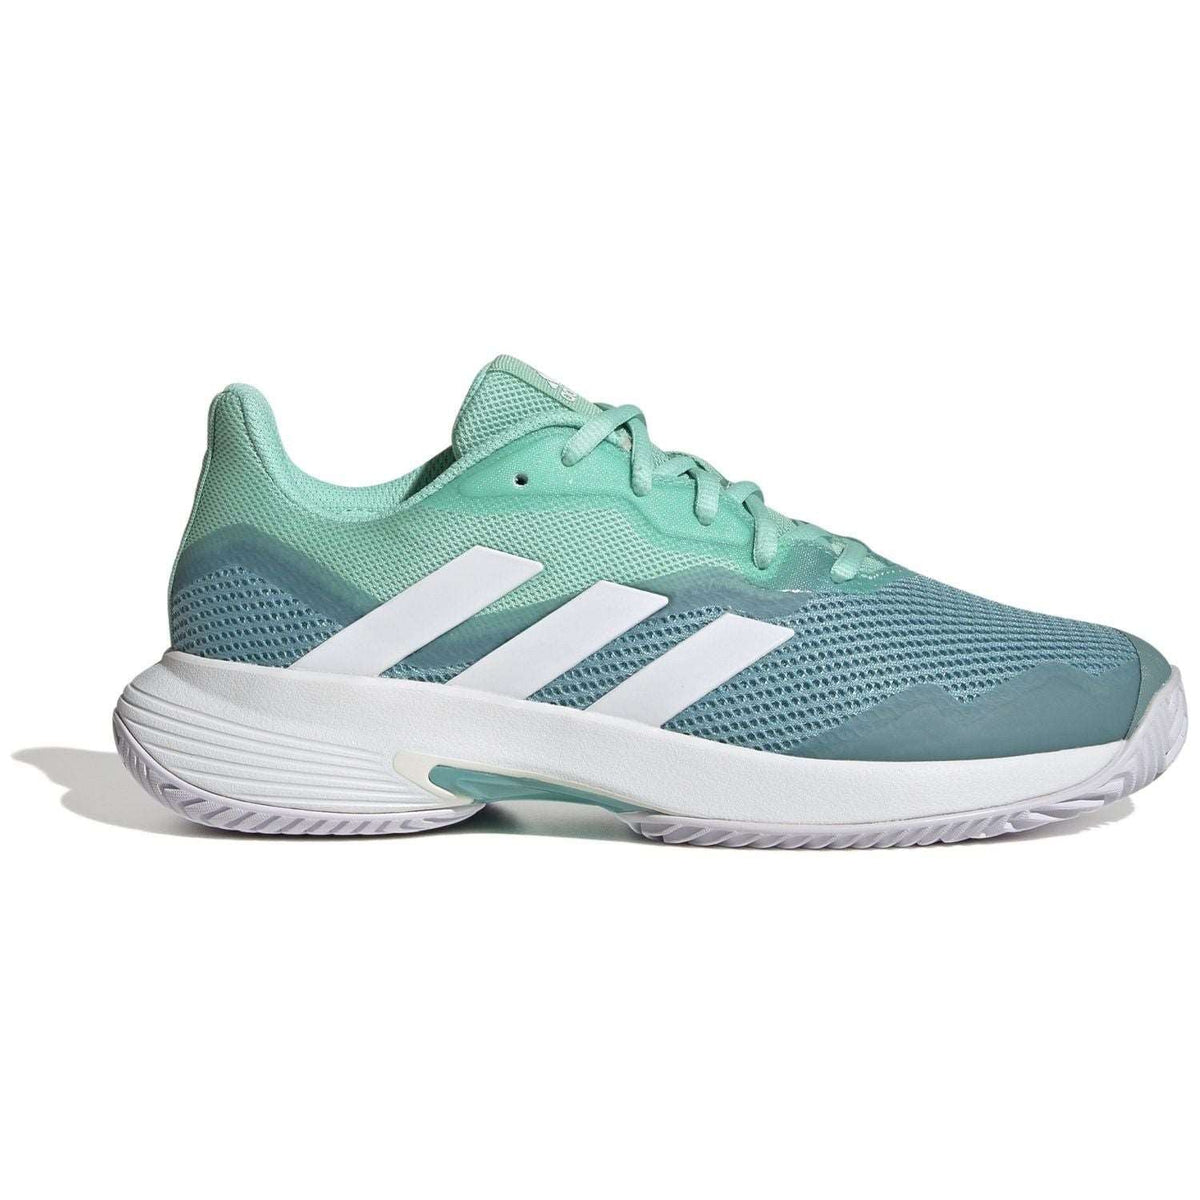 Adidas Courtjam Control Shoes Green White